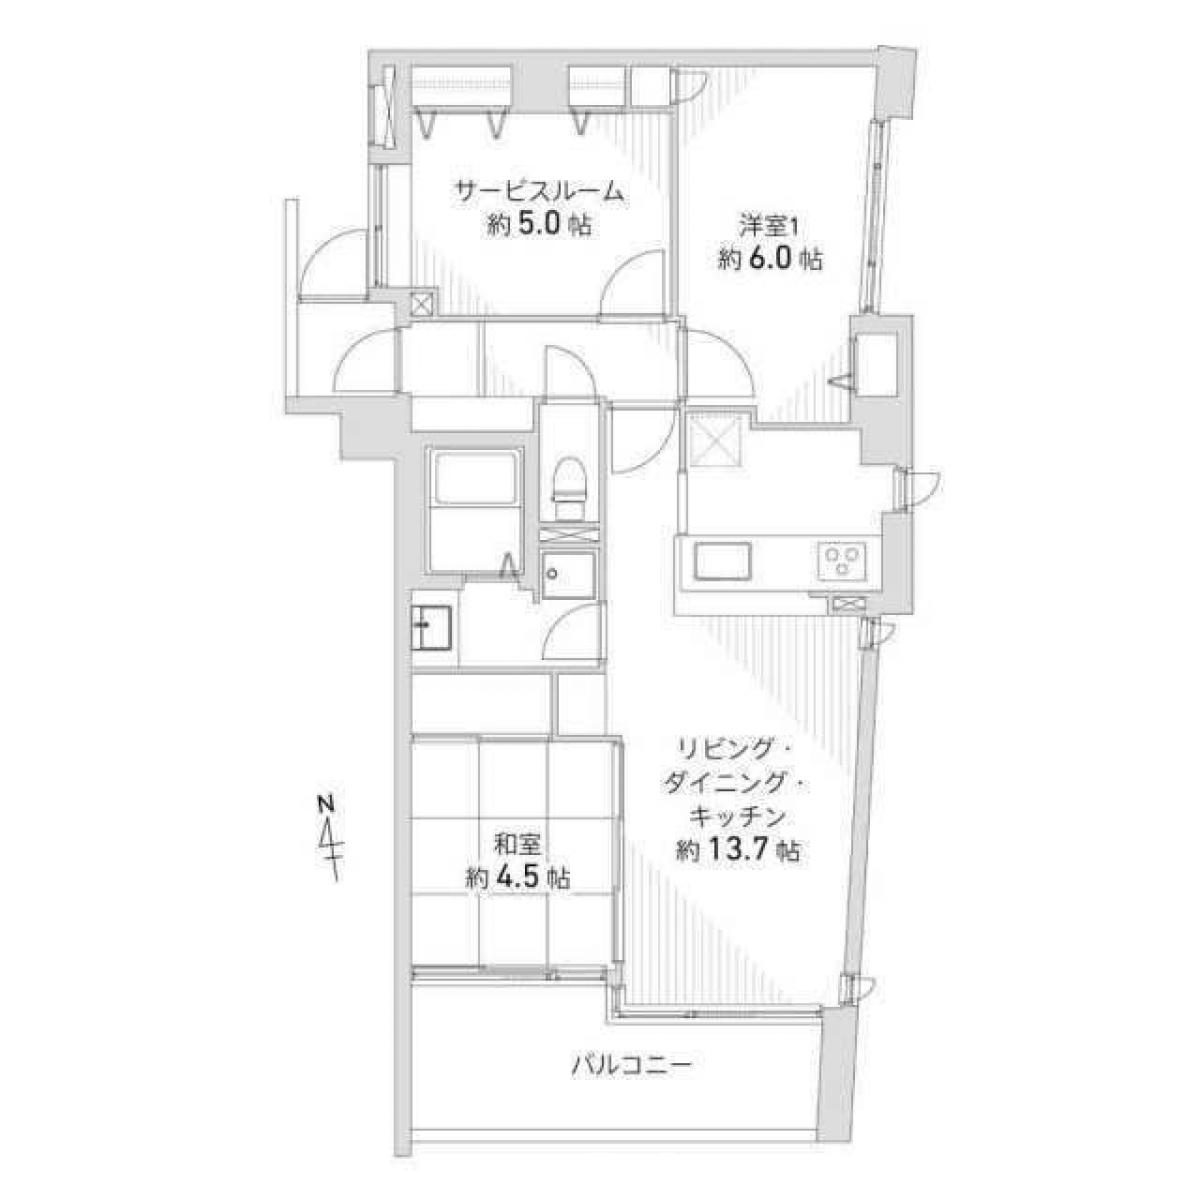 Picture of Apartment For Sale in Itami Shi, Hyogo, Japan